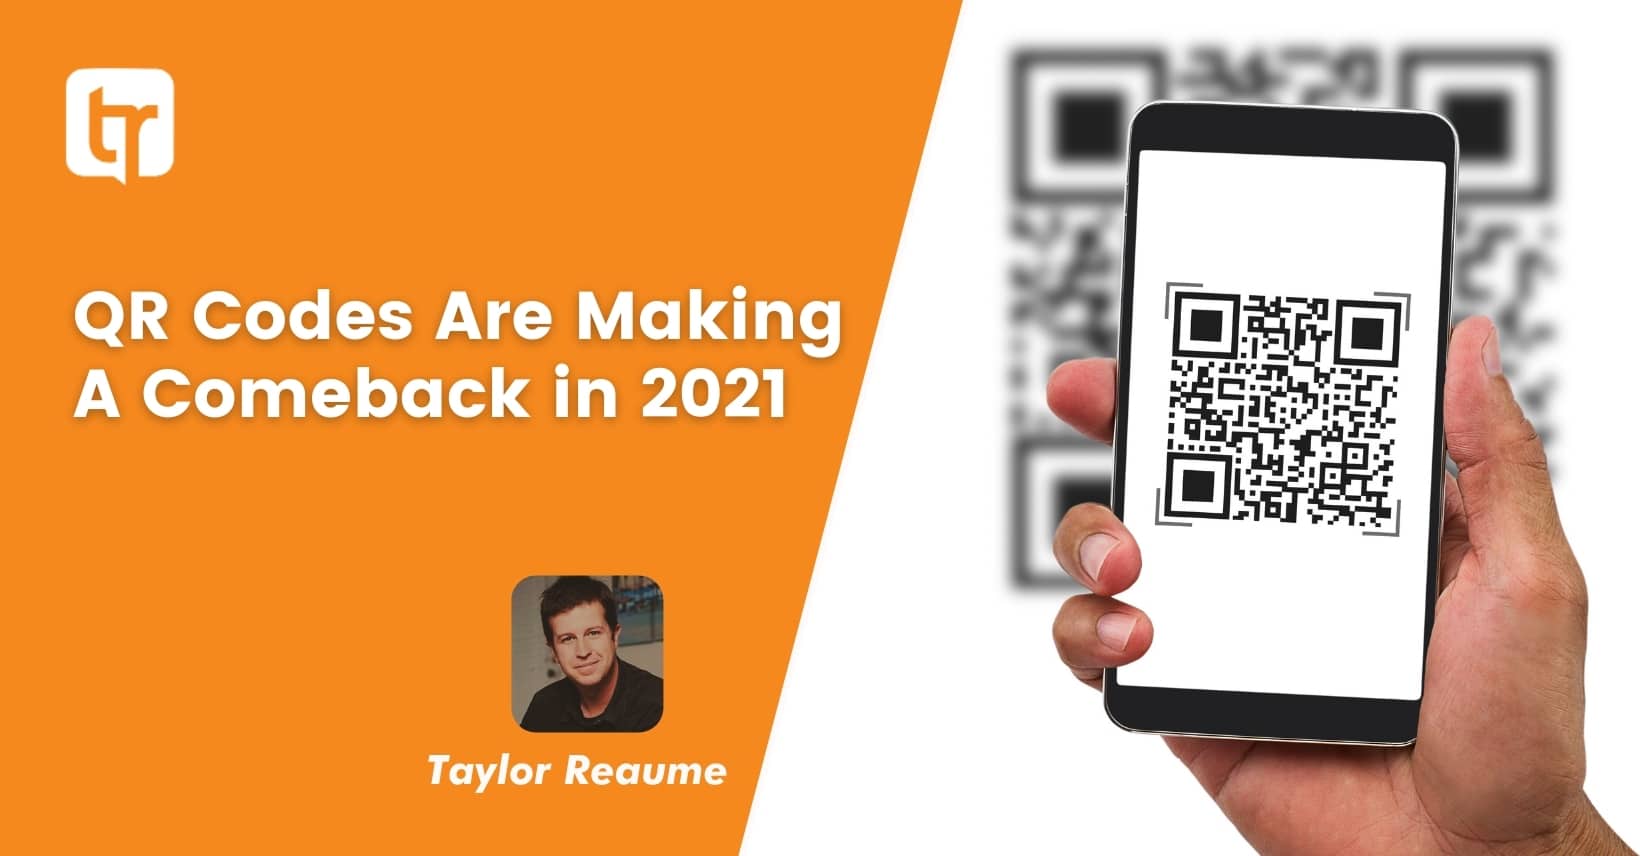 QR Codes Are Making A Comeback in 2021